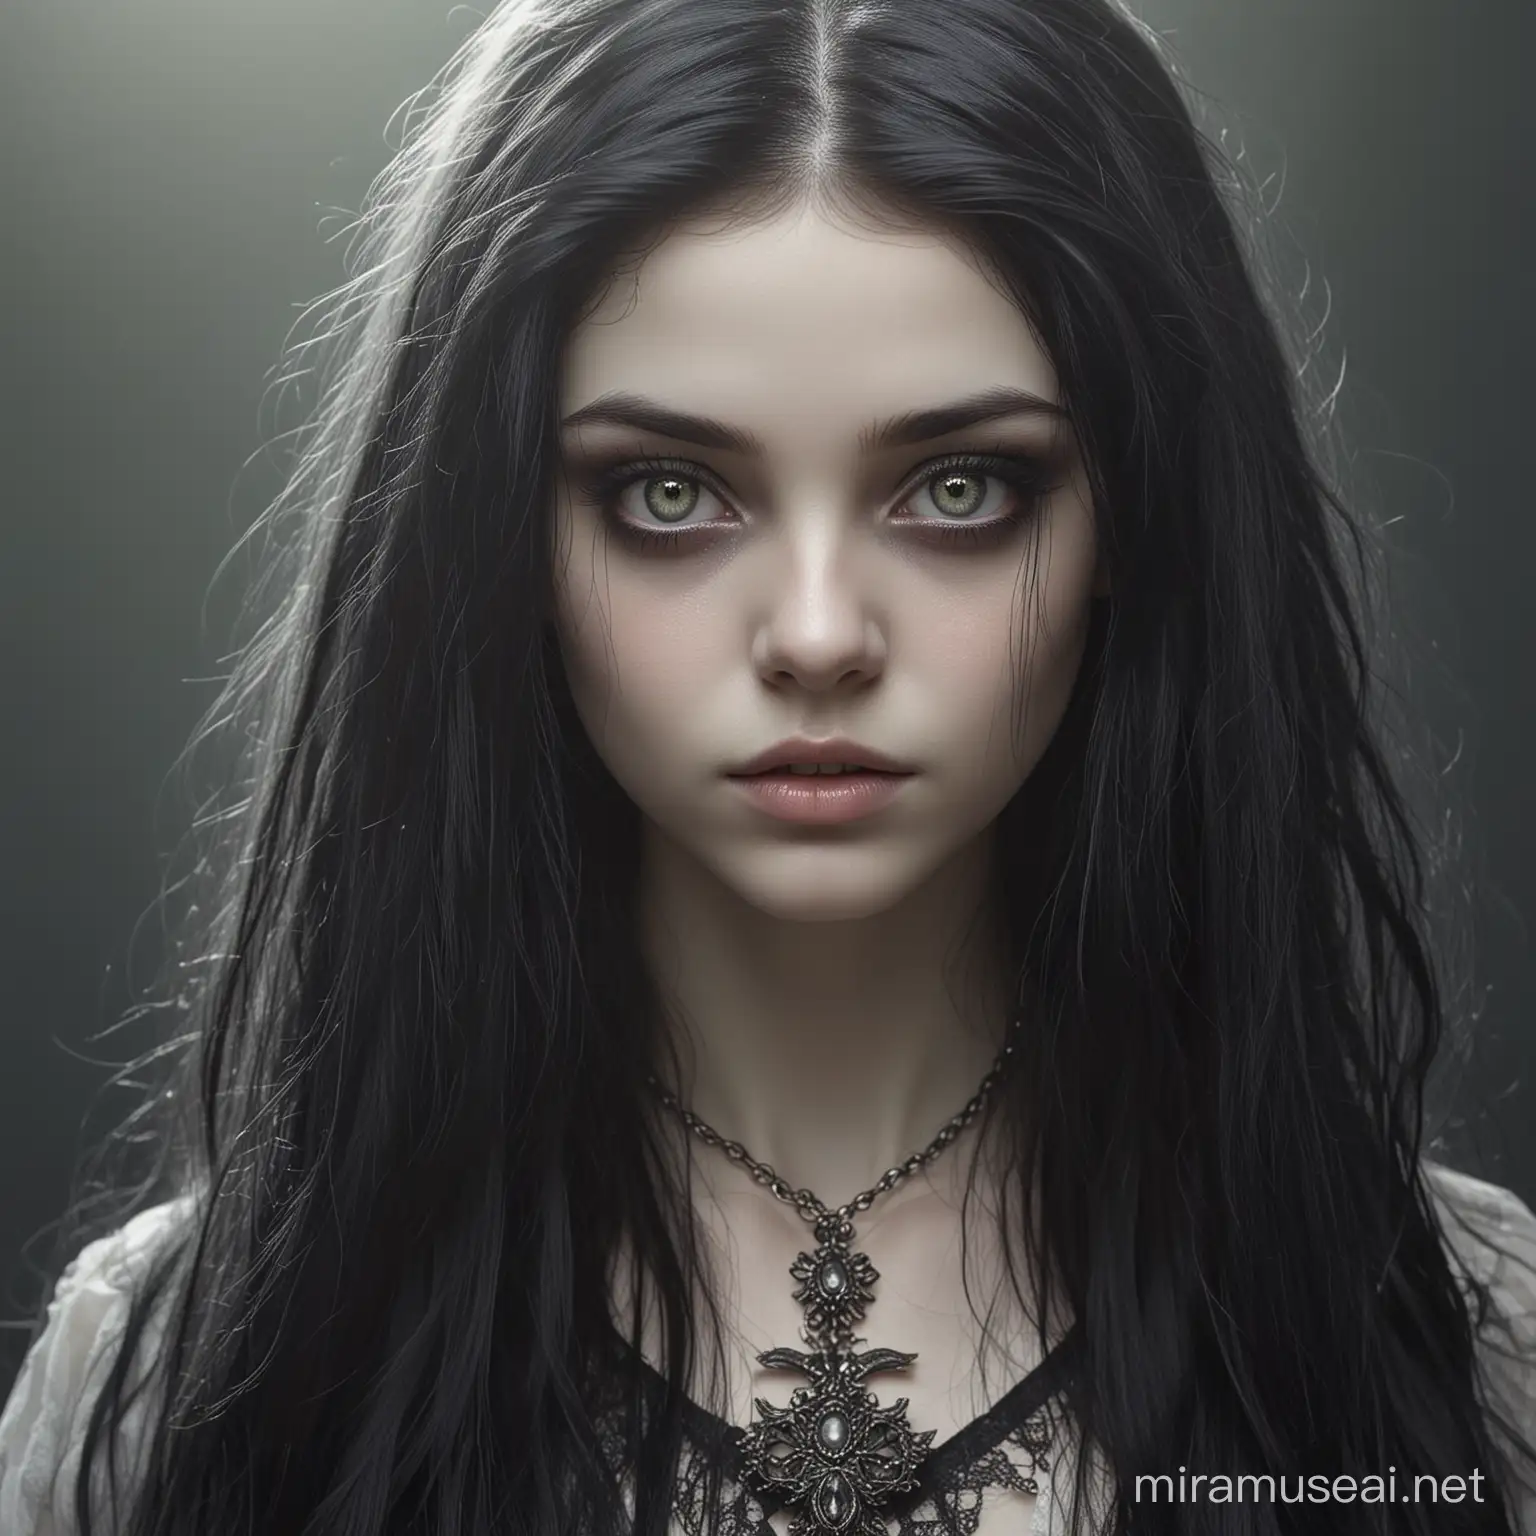 beautiful pale noble undead teenage woman with long black hair. Opaque silver eyes with no pupils.